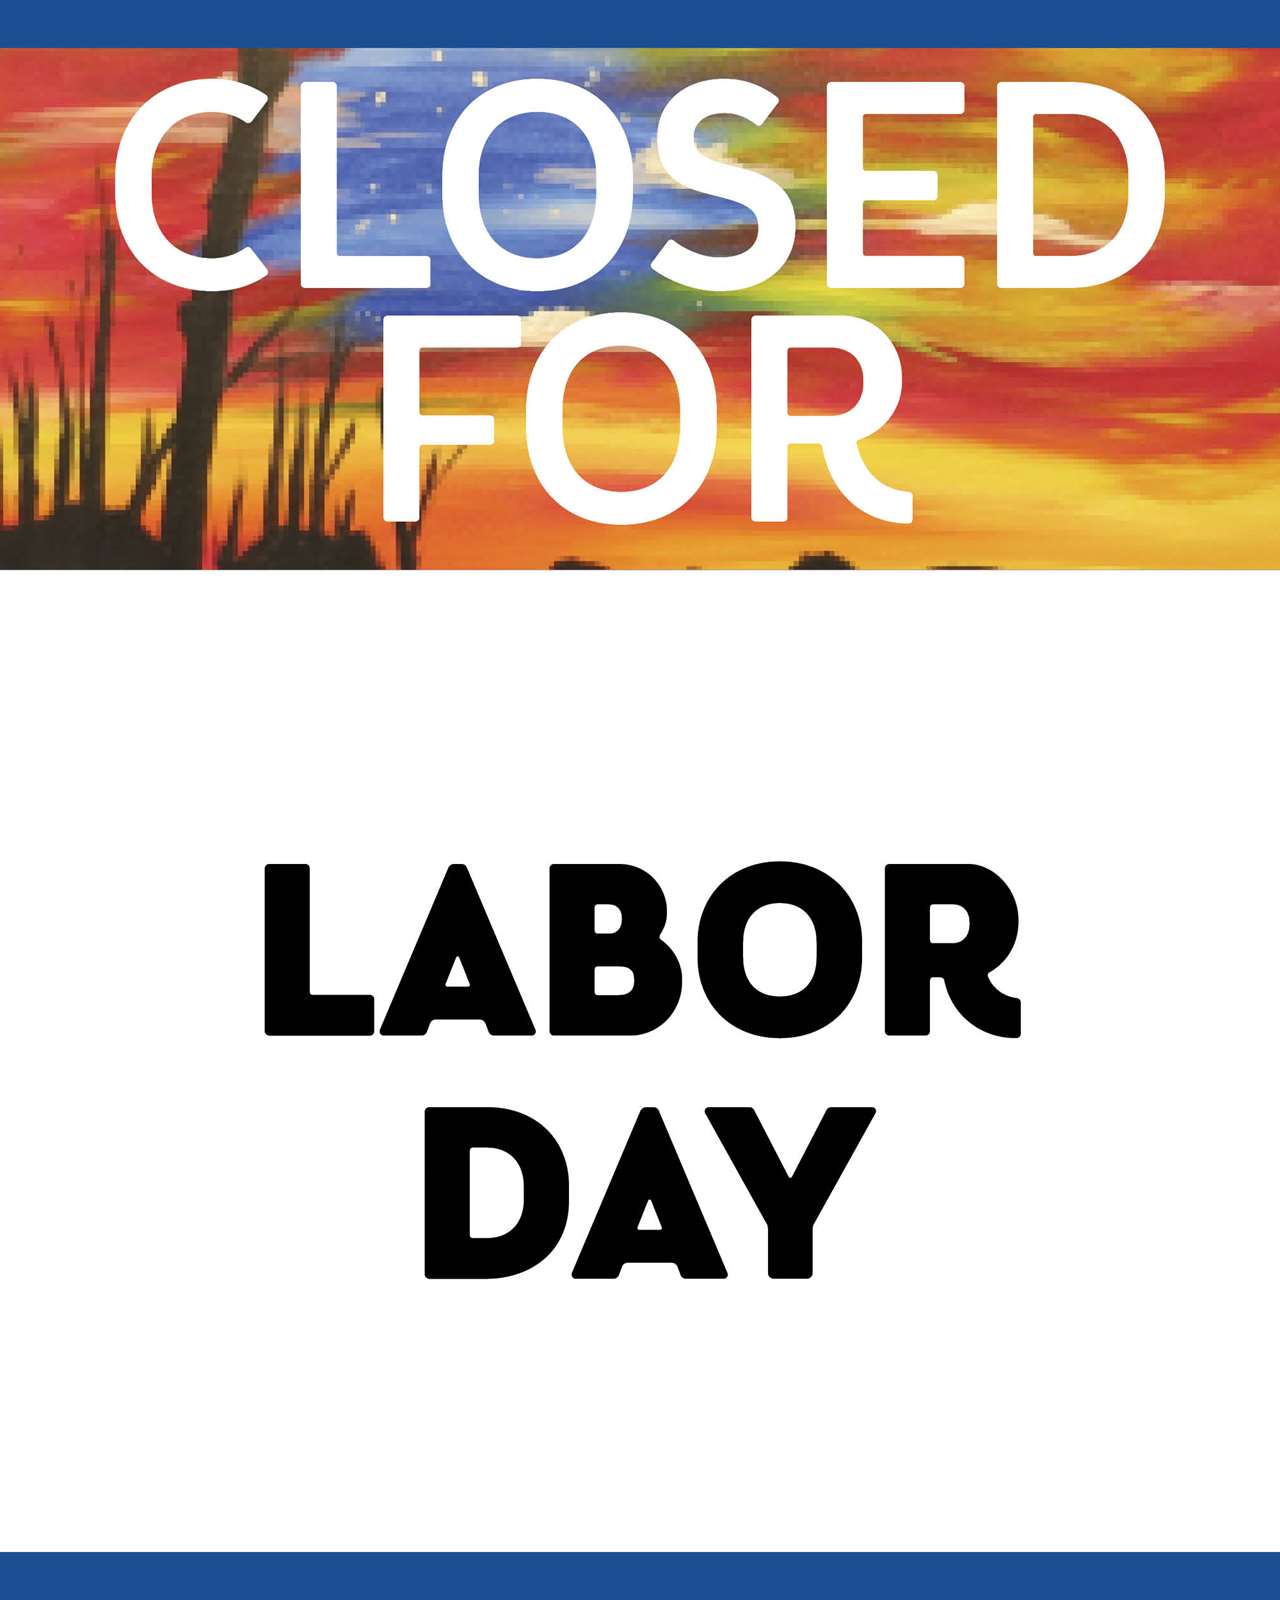 Closed for Labor Day Mon Sep 07 12AM at Logan Square